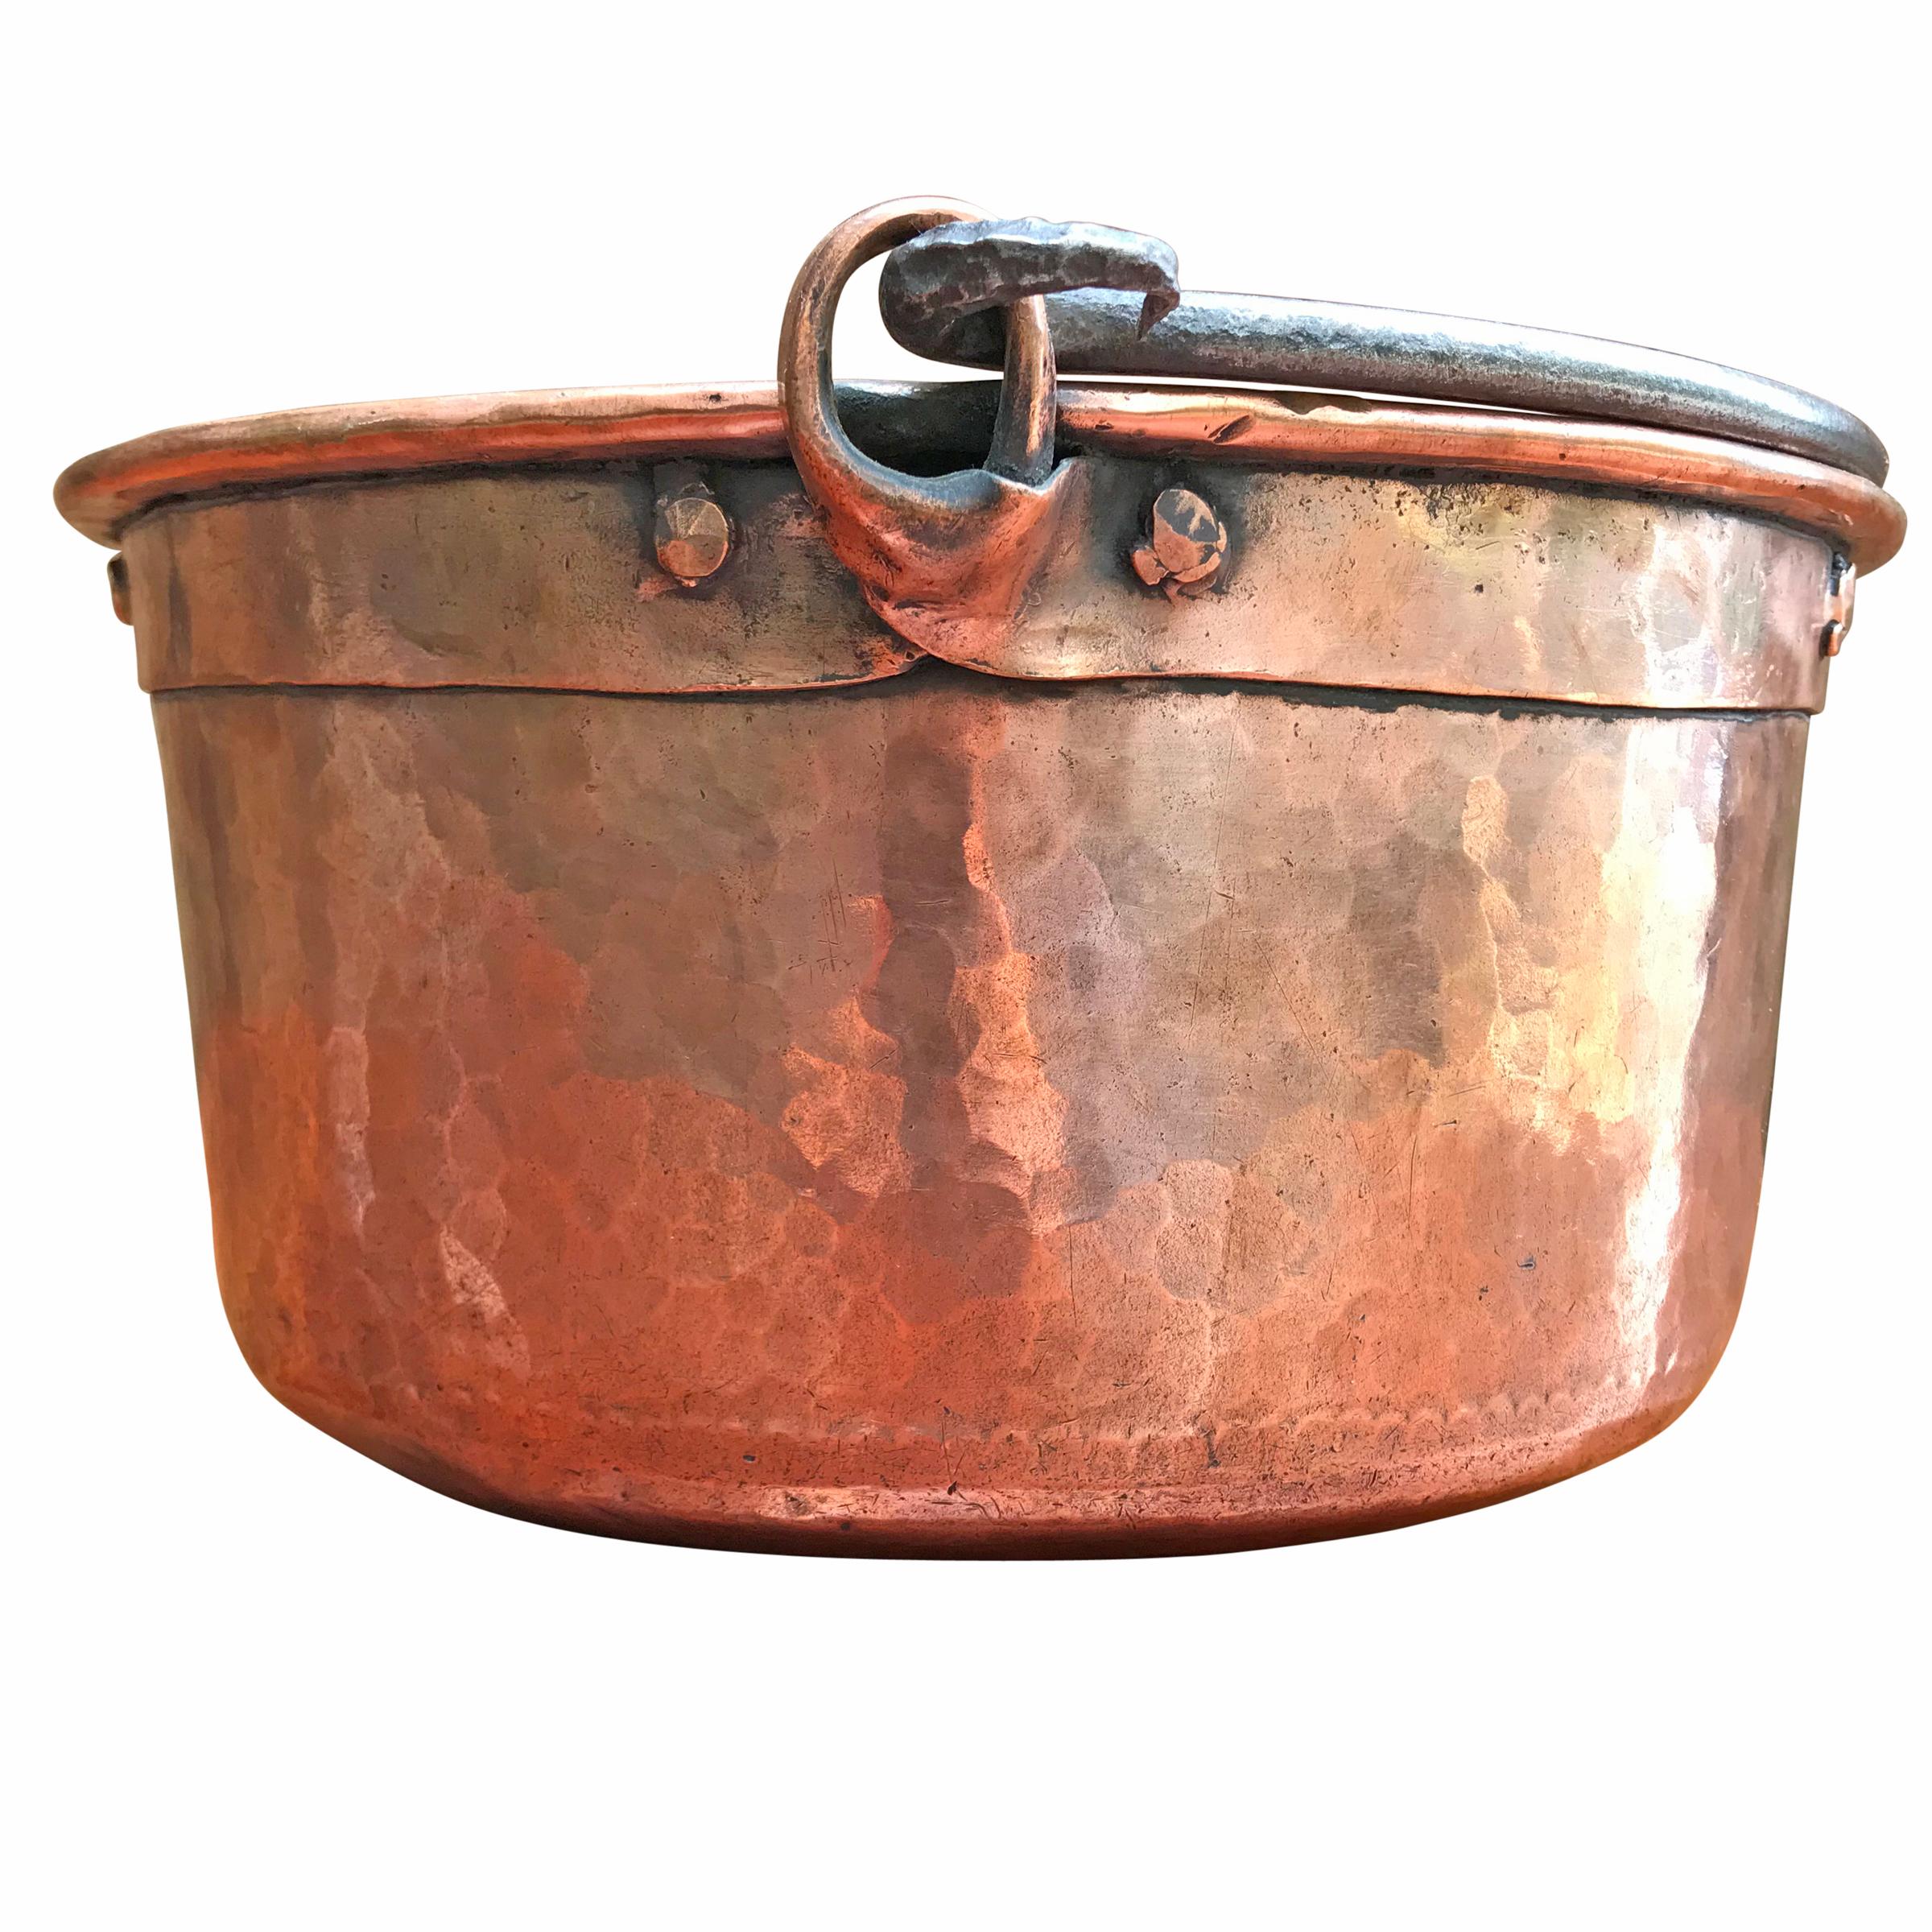 Early 19th Century French Hammered Copper Kettle In Good Condition For Sale In Chicago, IL